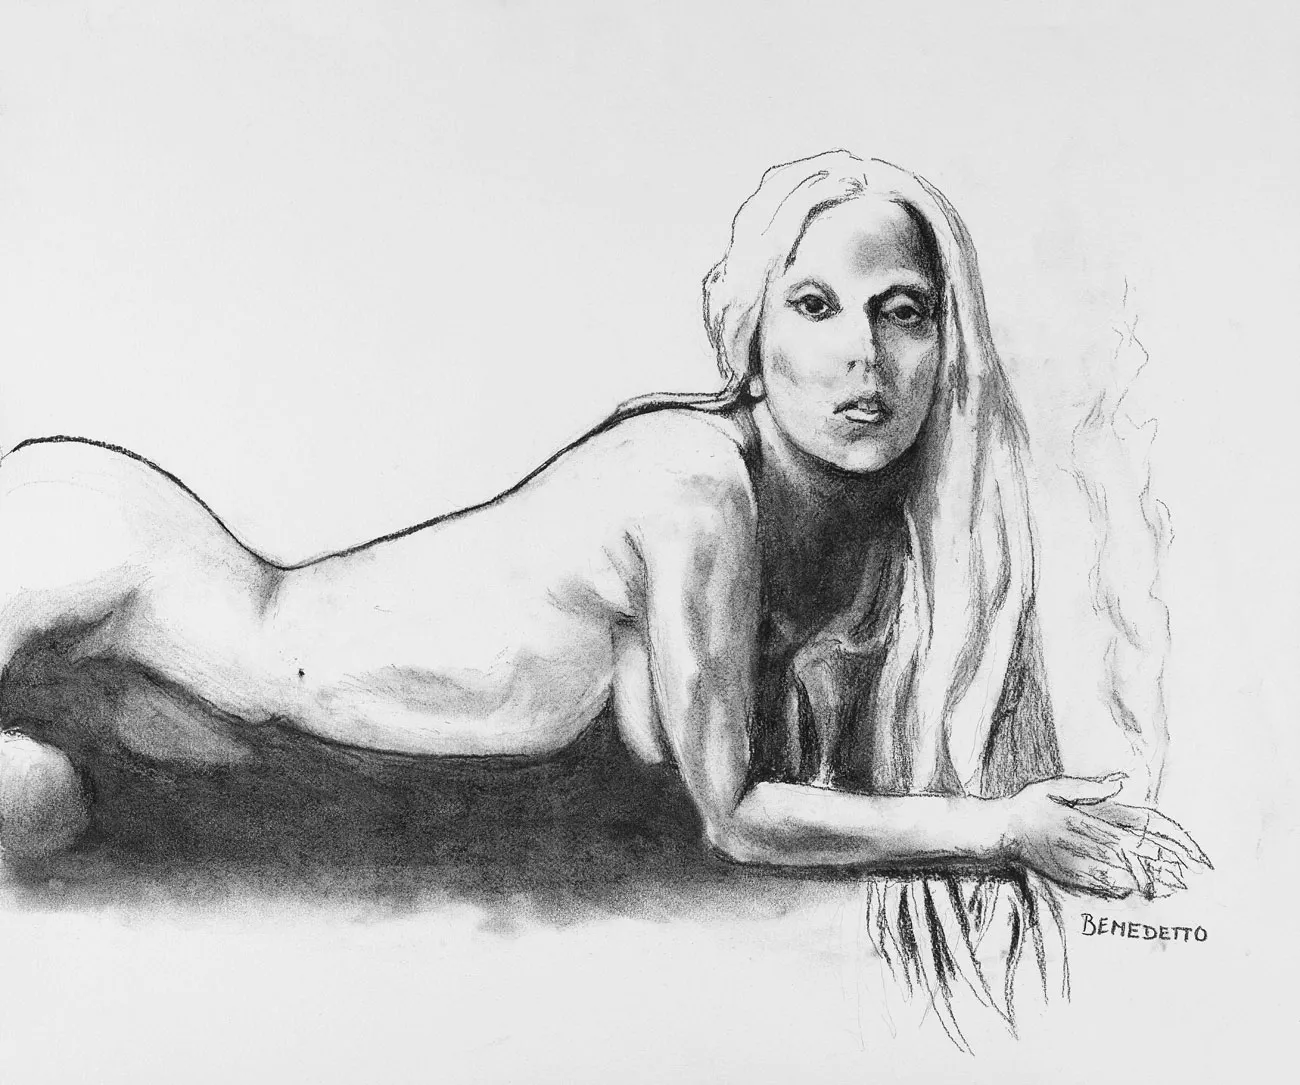 Drawing of Lady Gaga nude by Tony Bennett